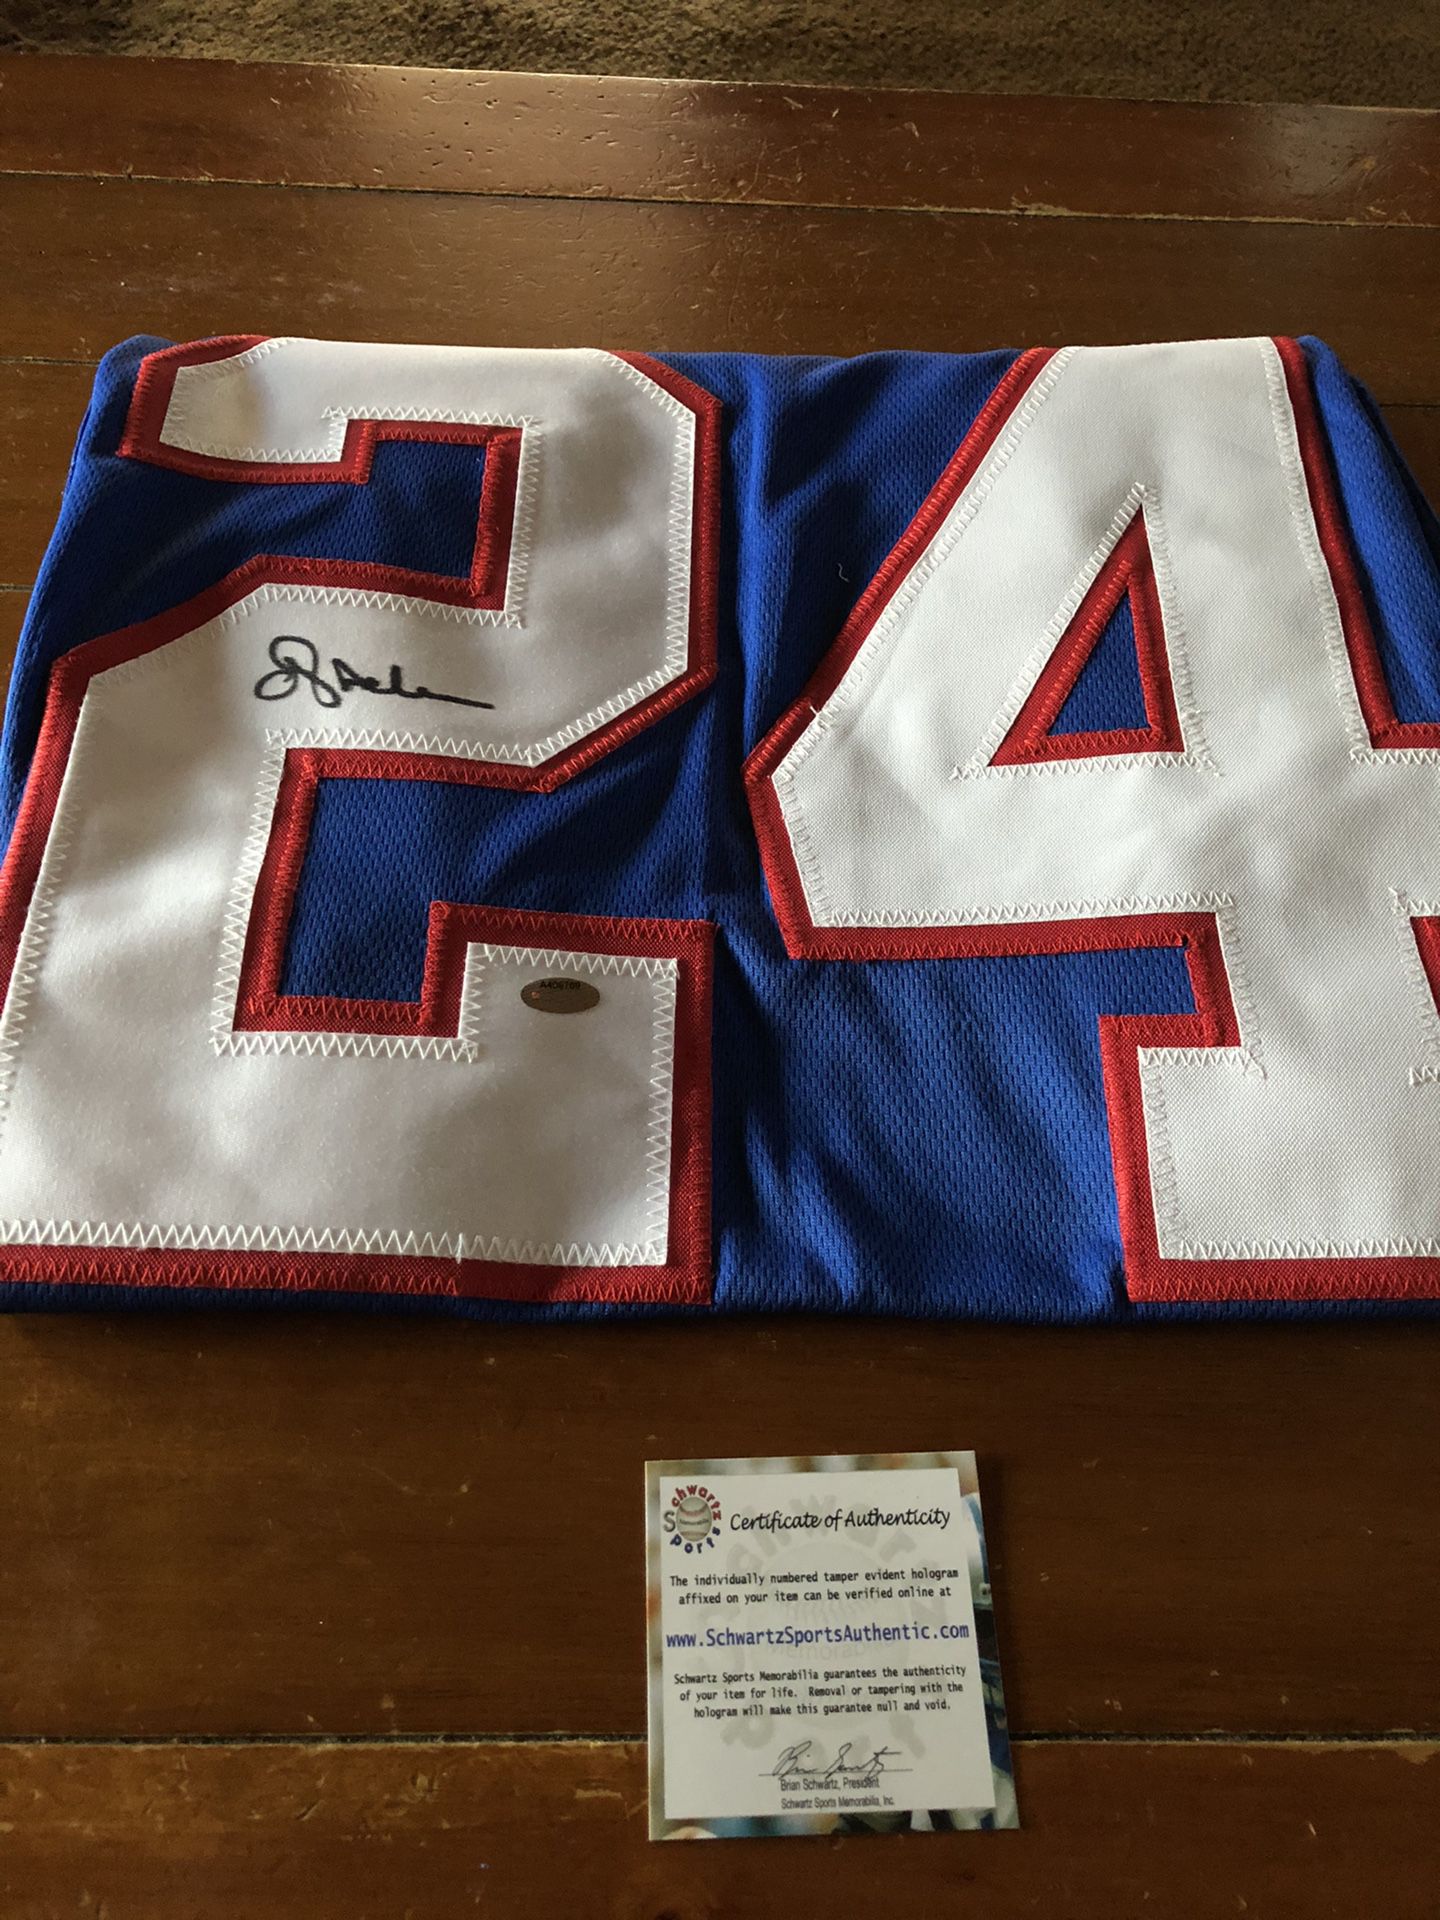 ottis anderson signed jersey